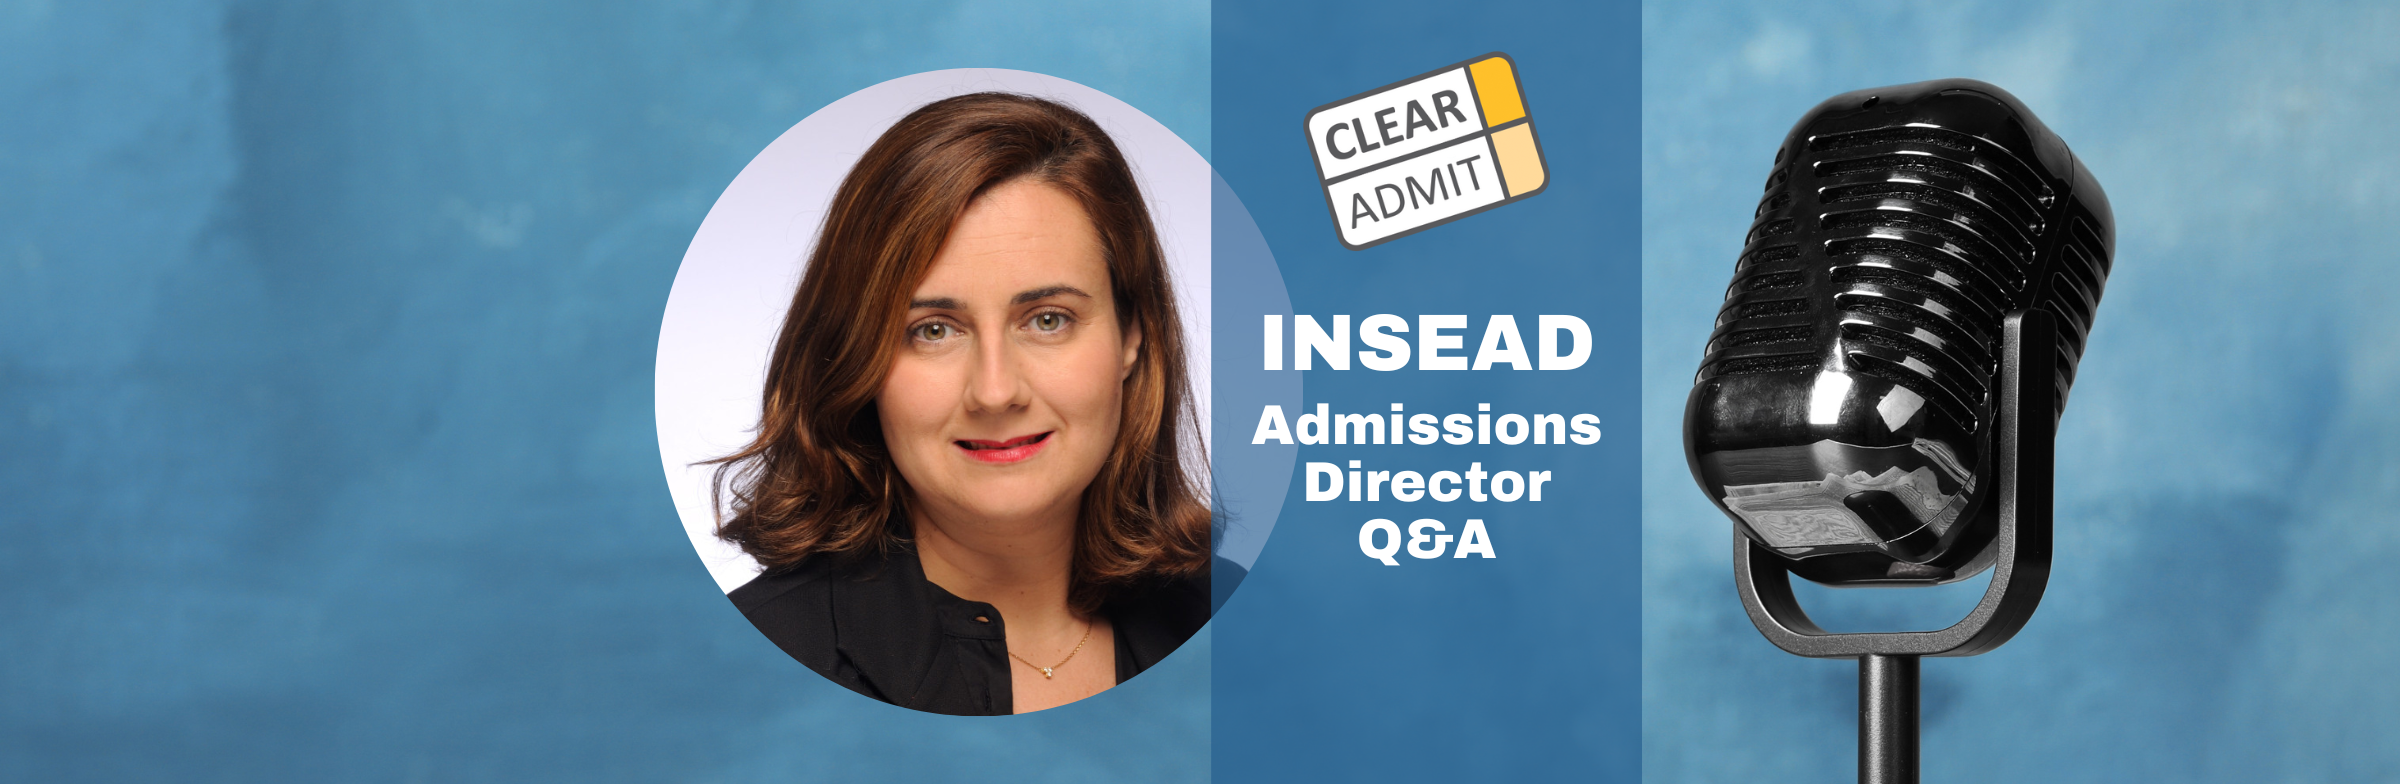 Image for Admissions Director Q&A: Teresa Peiro-Camaro of INSEAD